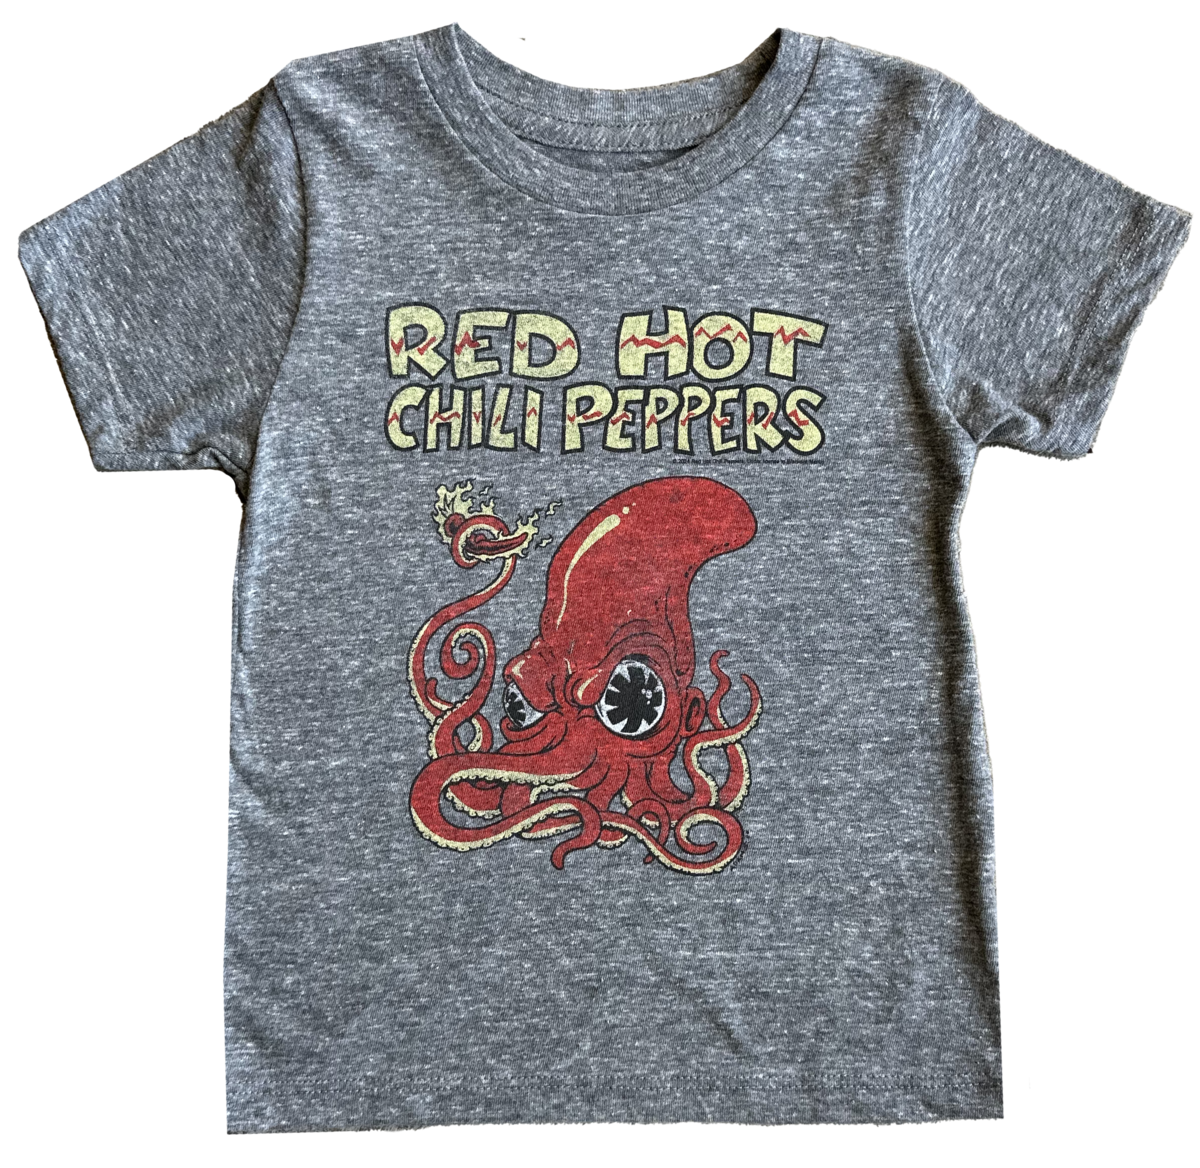 Red Hot Chili Peppers Tri-Blend Simple Tee - Twinkle Twinkle Little One